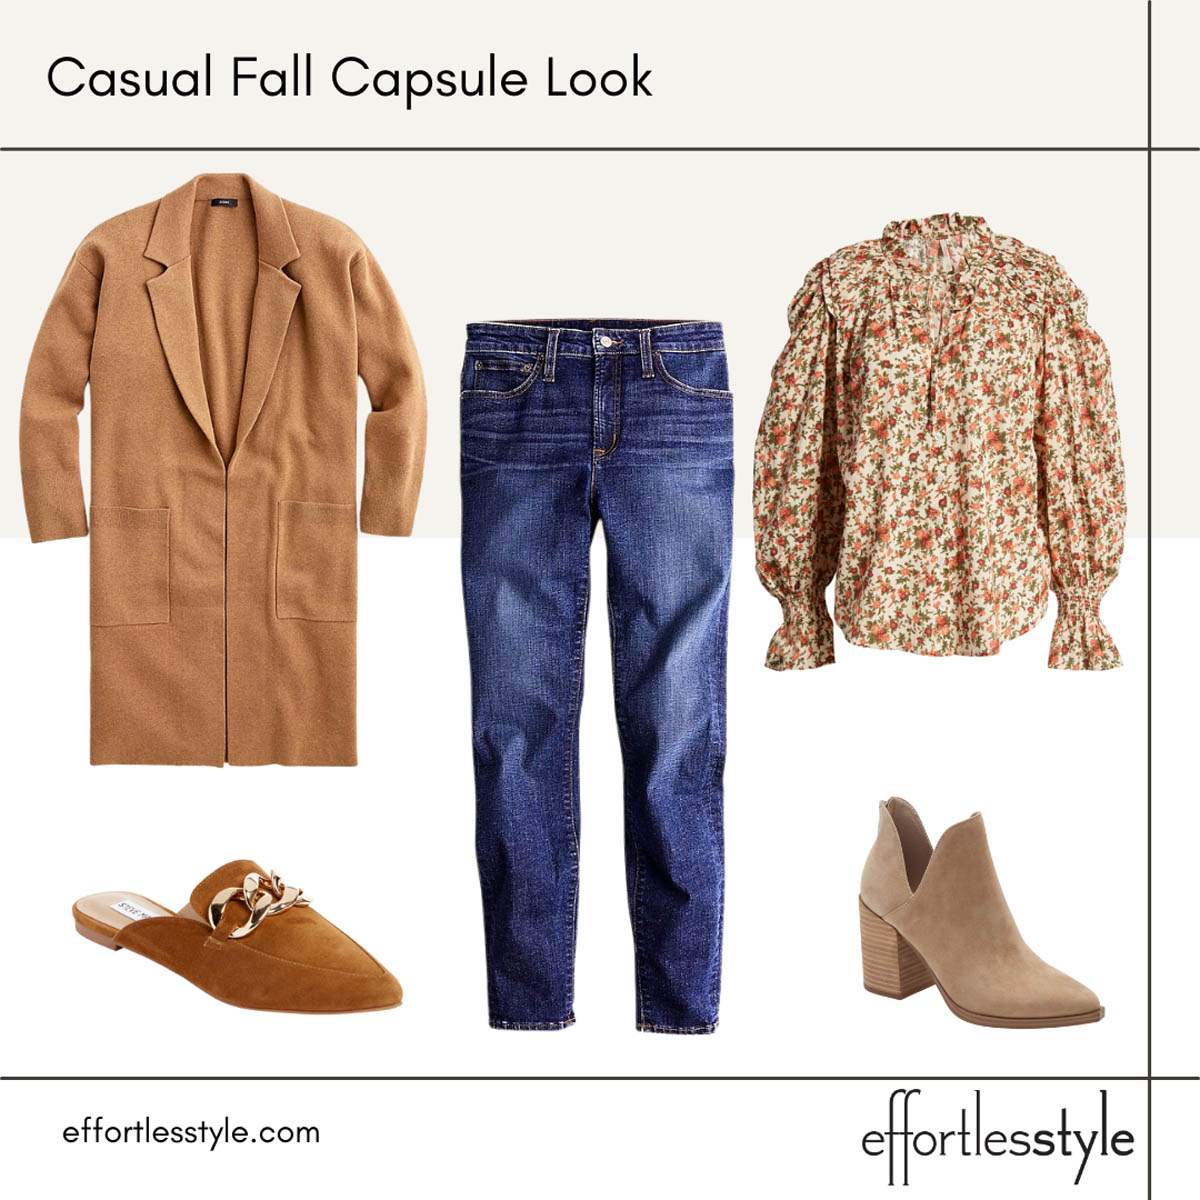 Fall Capsule Wardrobe Looks Camel Coatigan and Floral Blouse Outfit